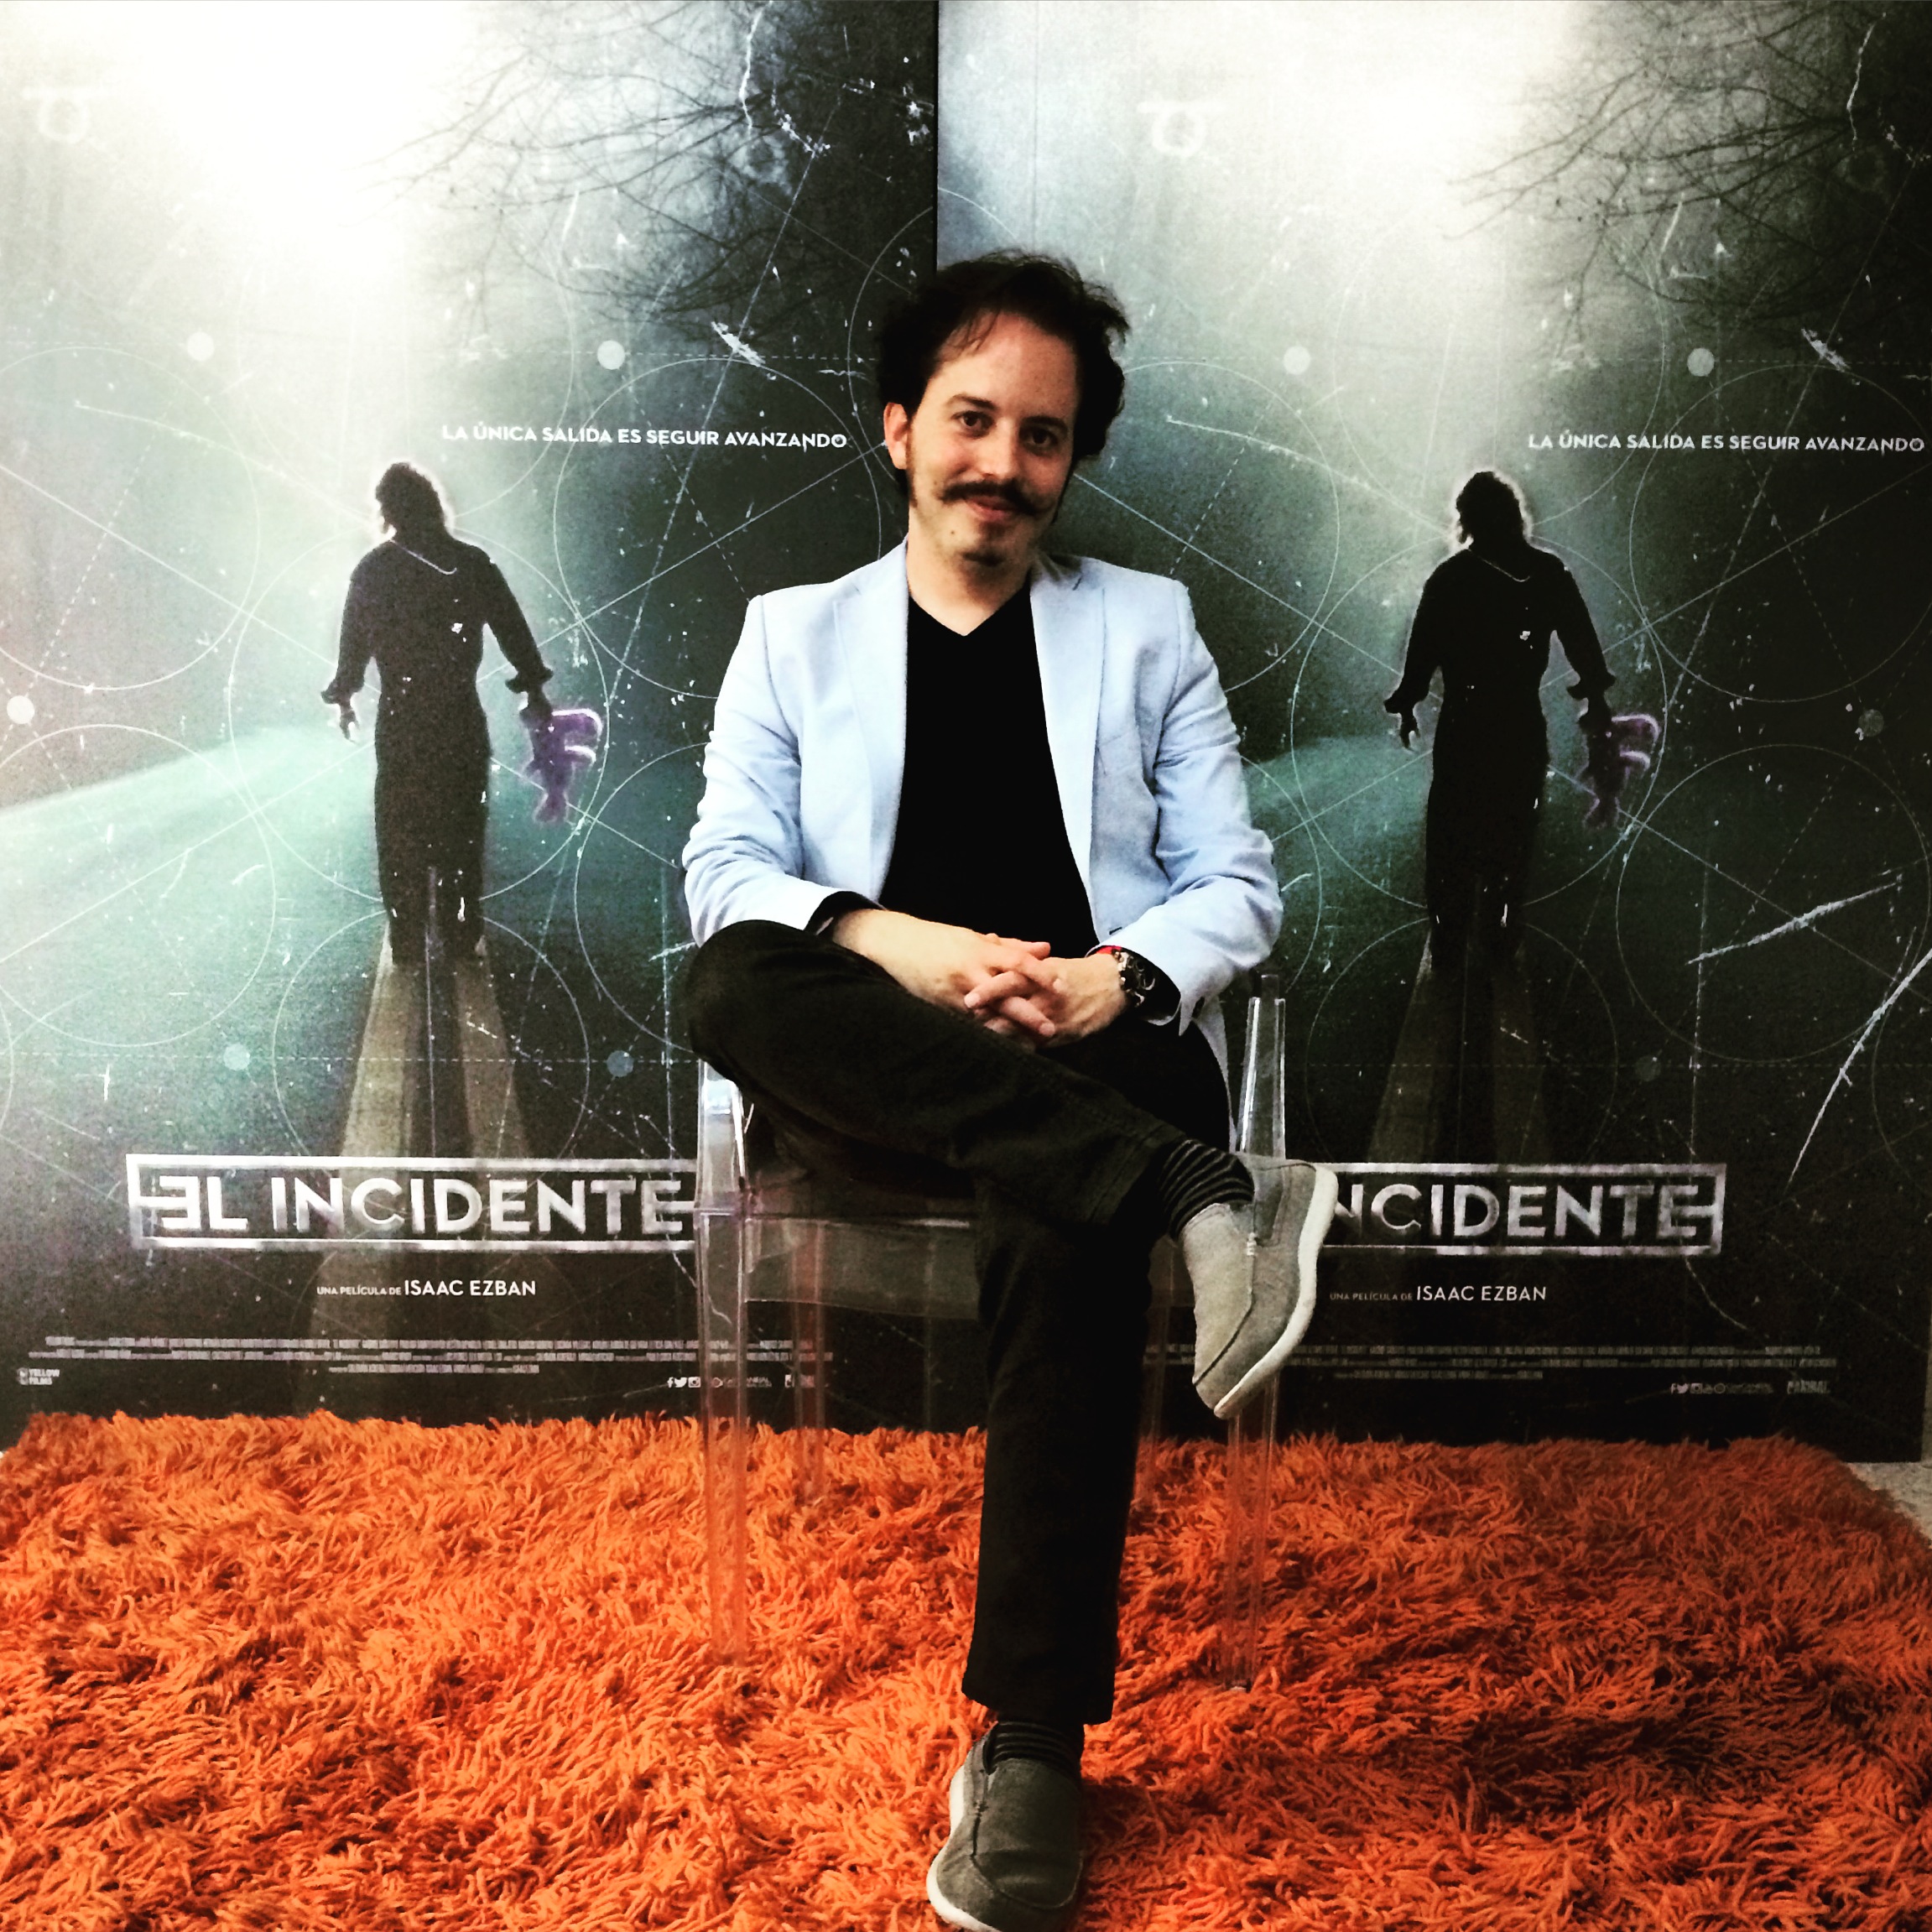 Isaac Ezban in press junket on June 2015 for the theatrical release of his first feature film THE INCIDENT in Mexico (September 2015).